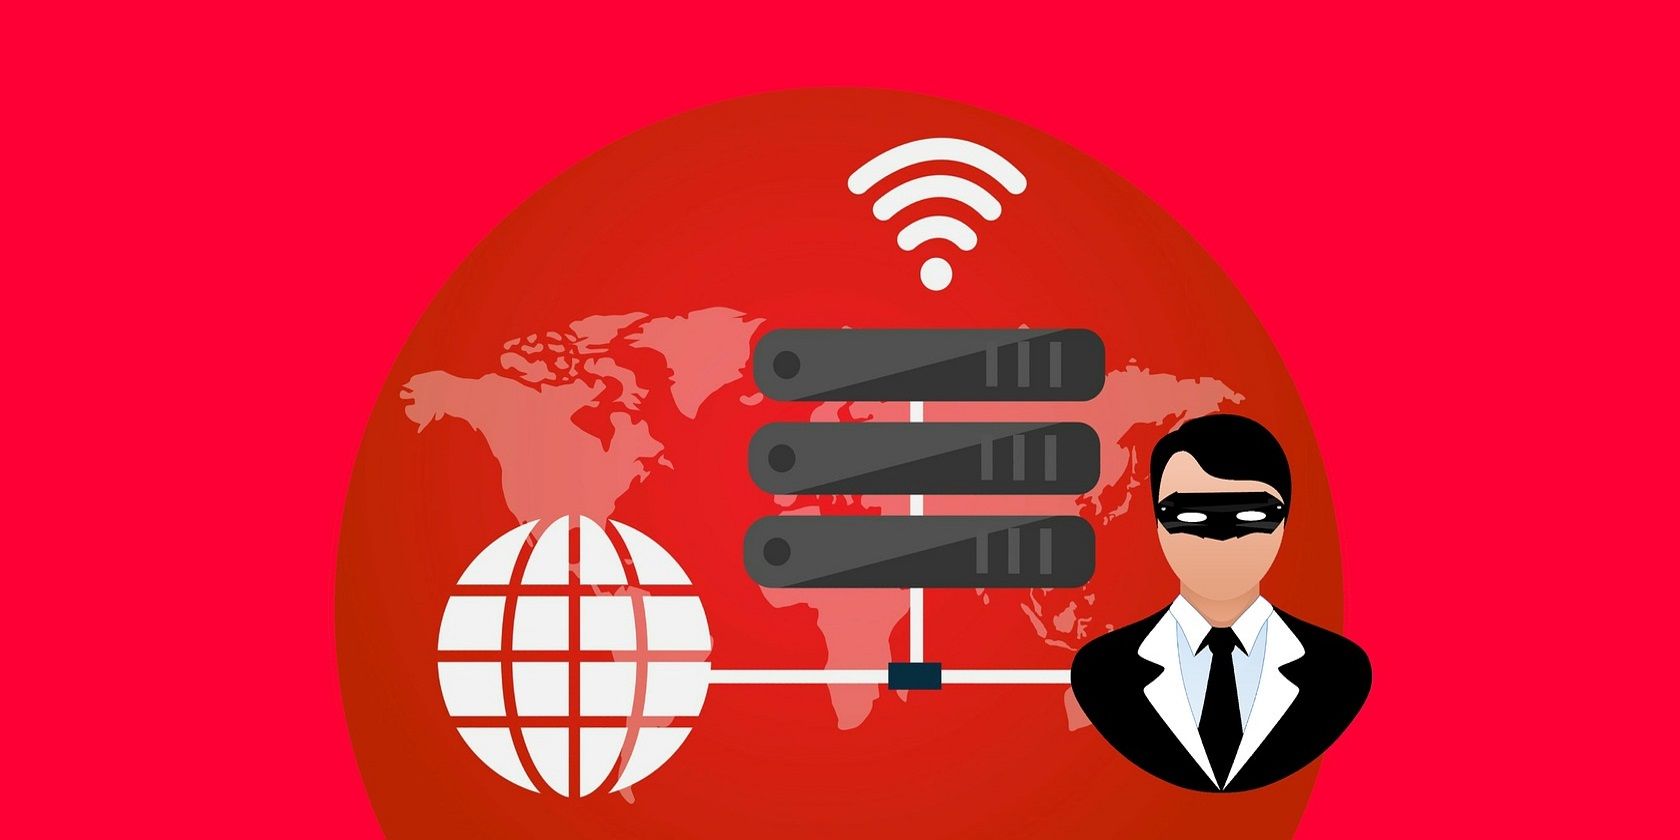 Representation of an anonymous VPN connection